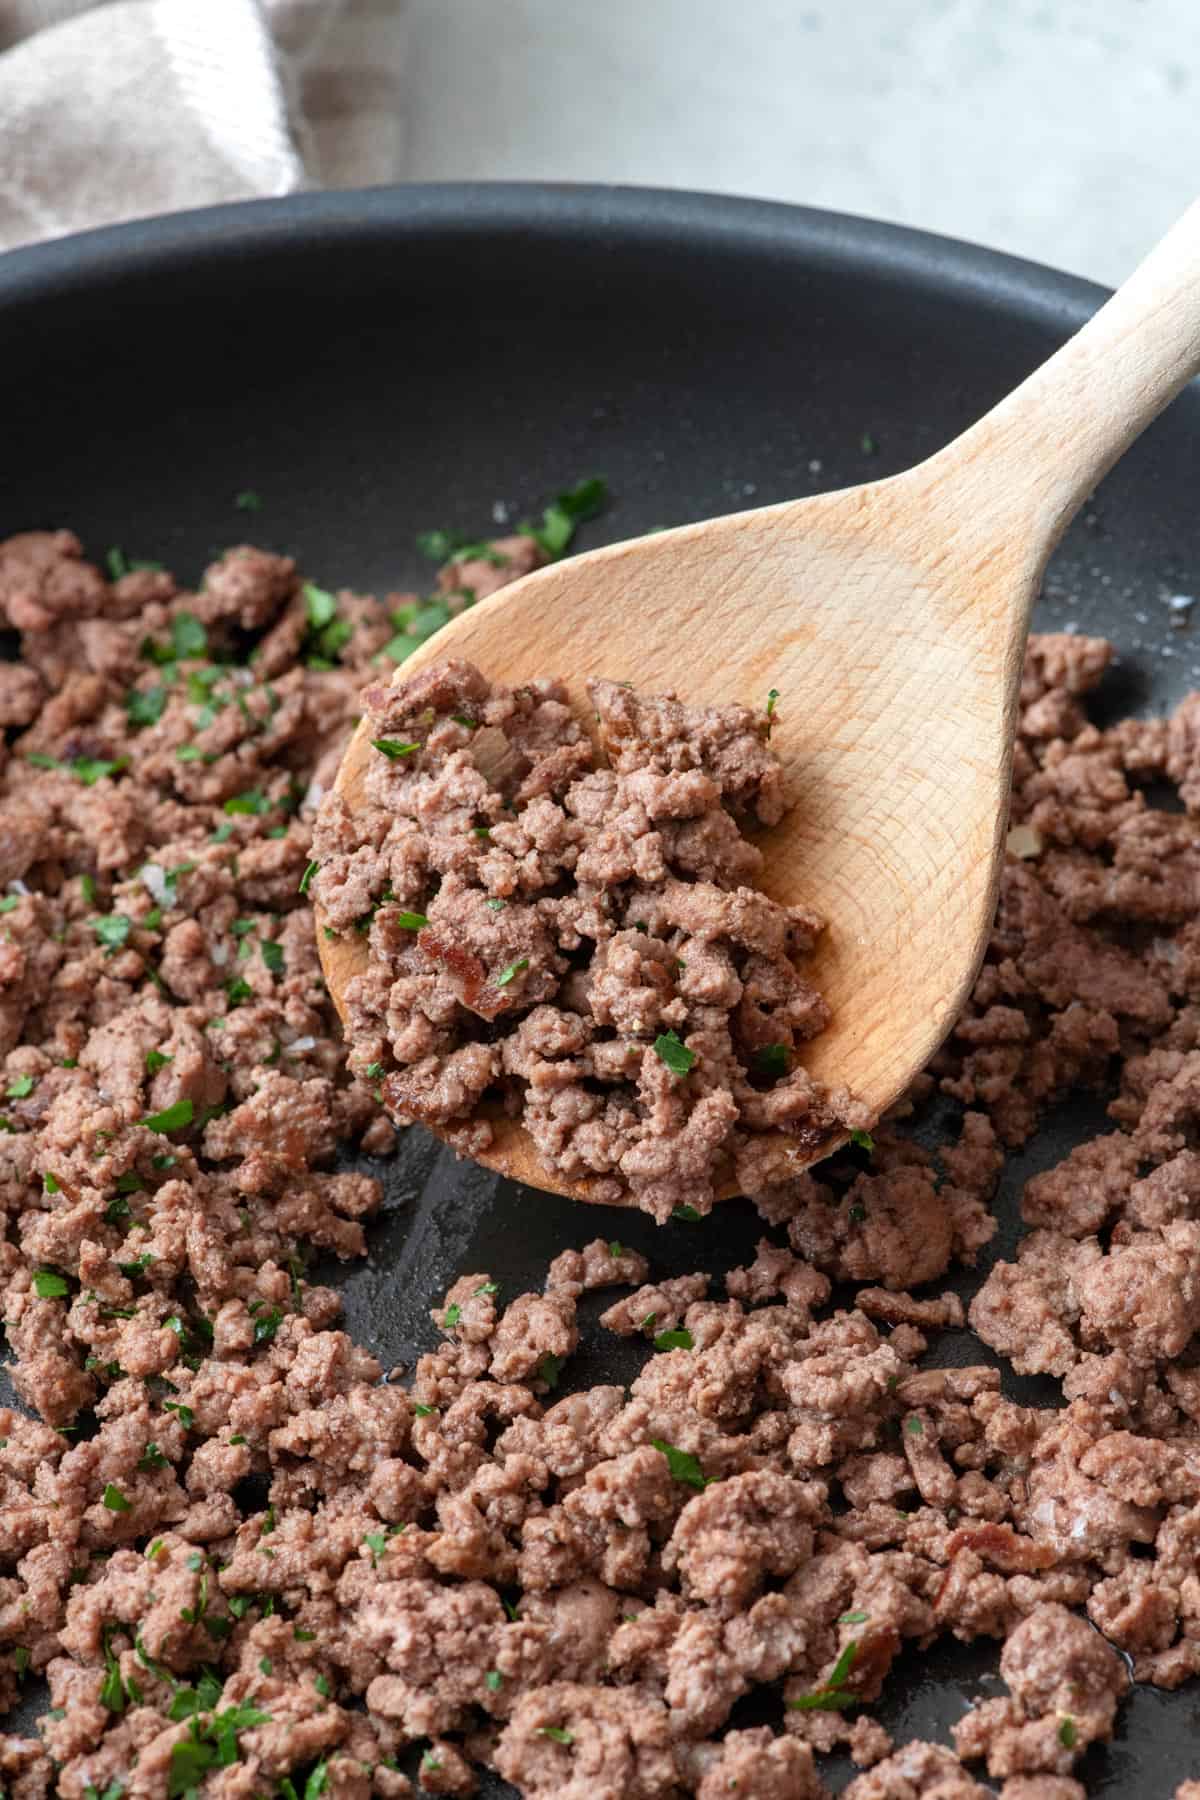 Round wood spatula lifting up ground beef from pan.